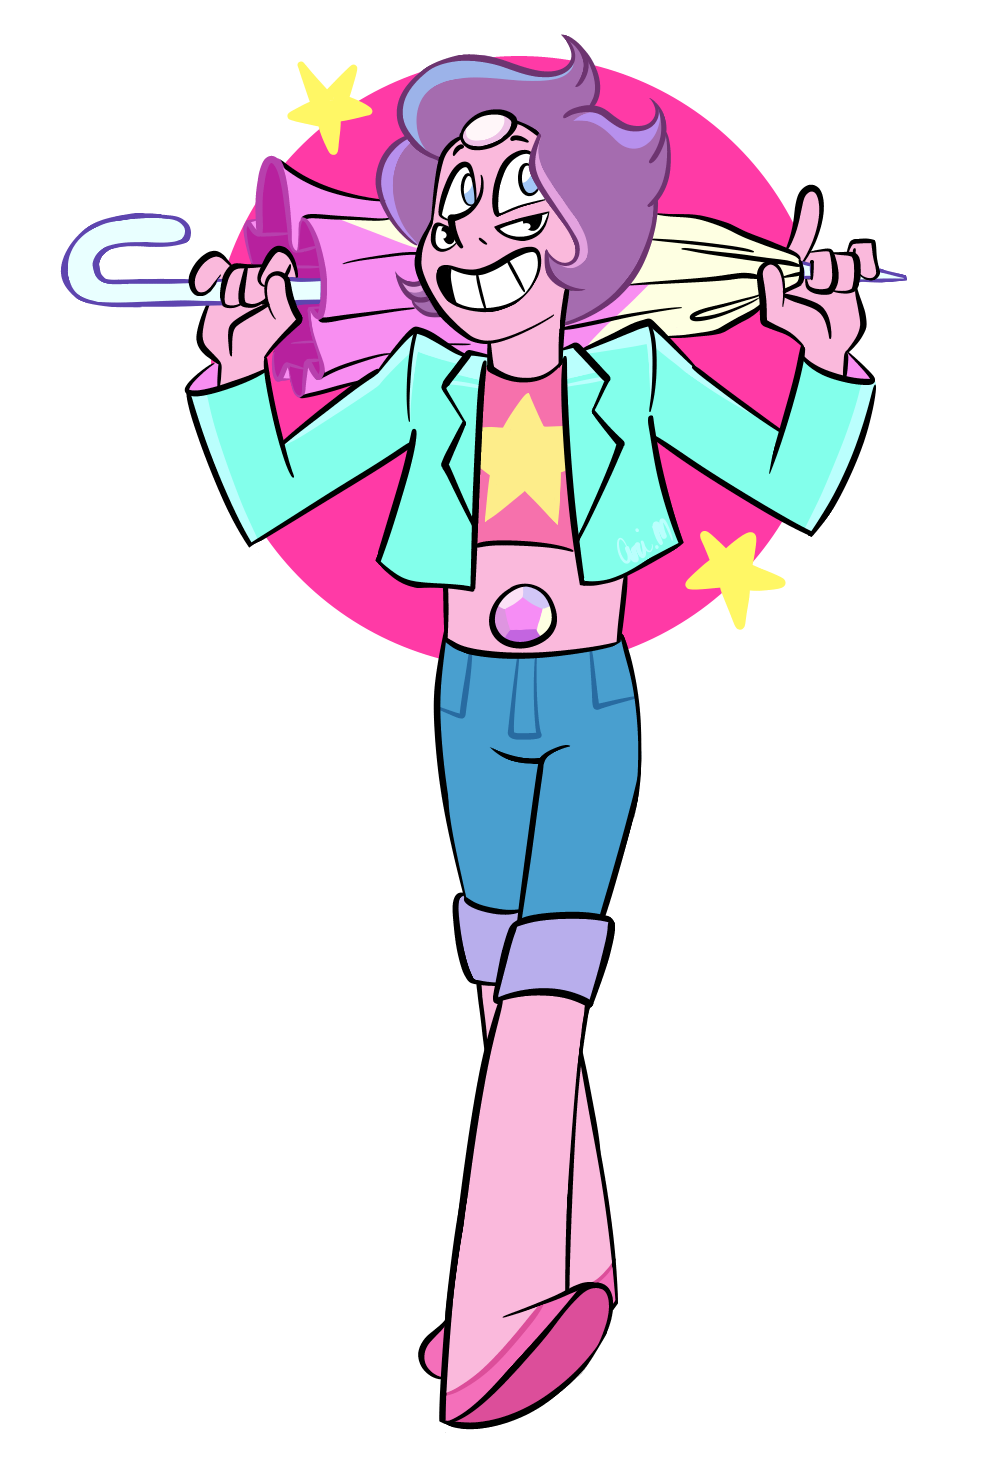 thank u steven universe for my life :’)